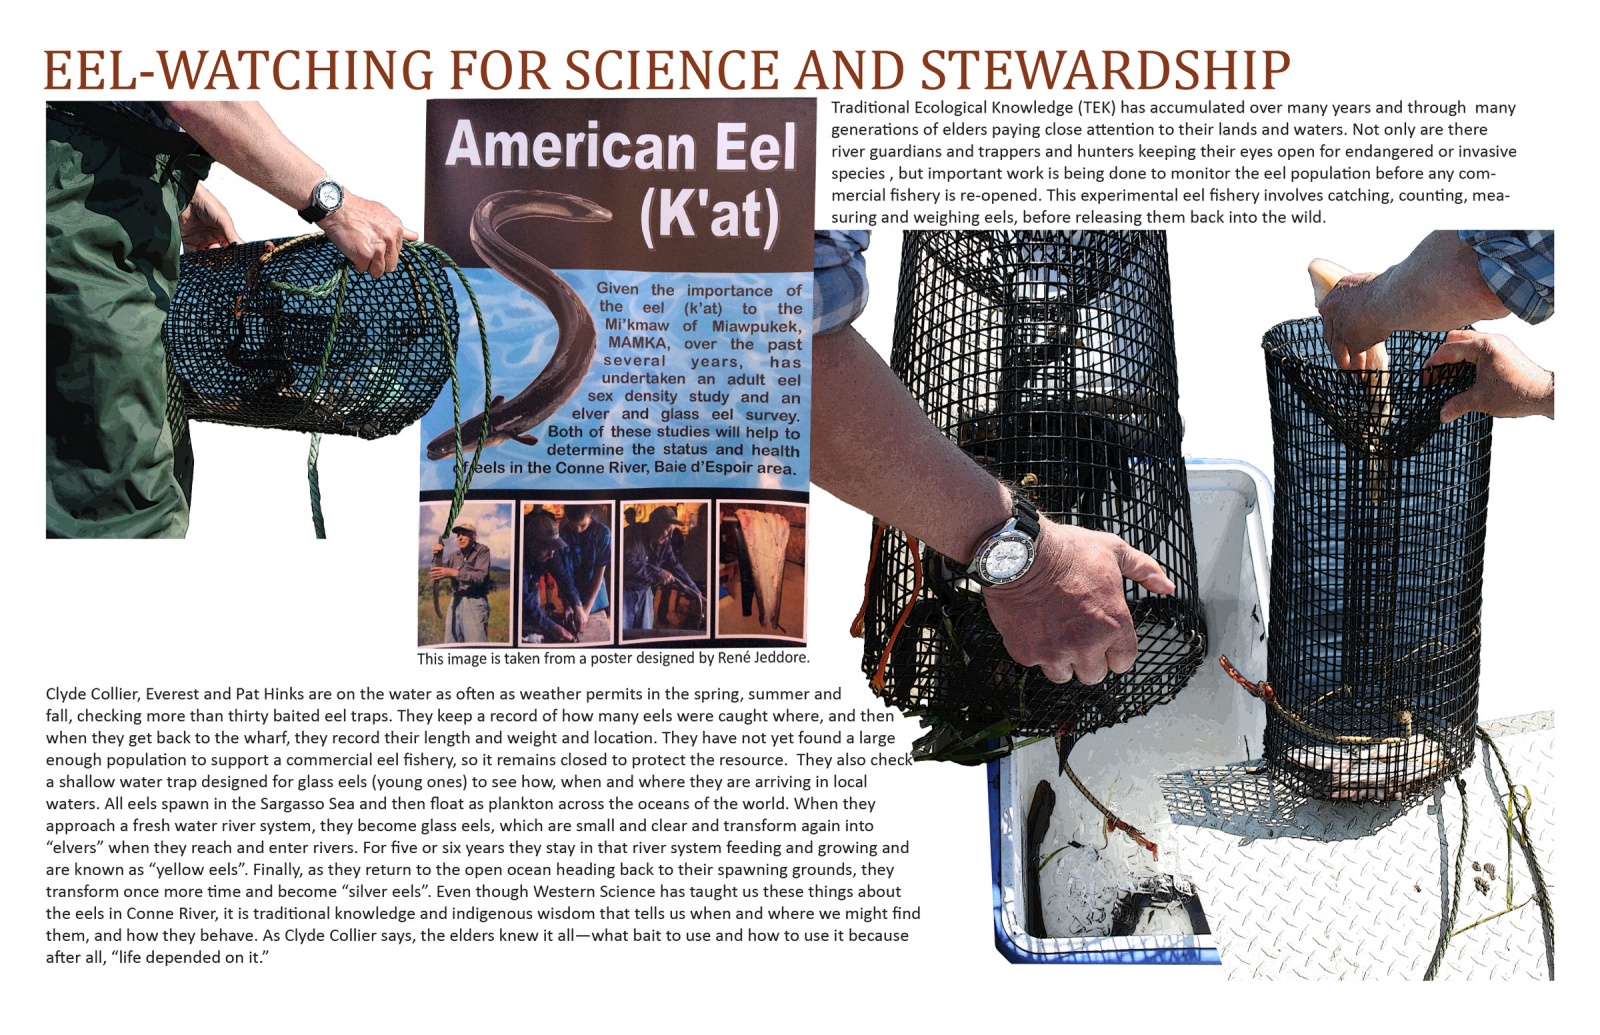 Eel-watching for Science and Stewardship